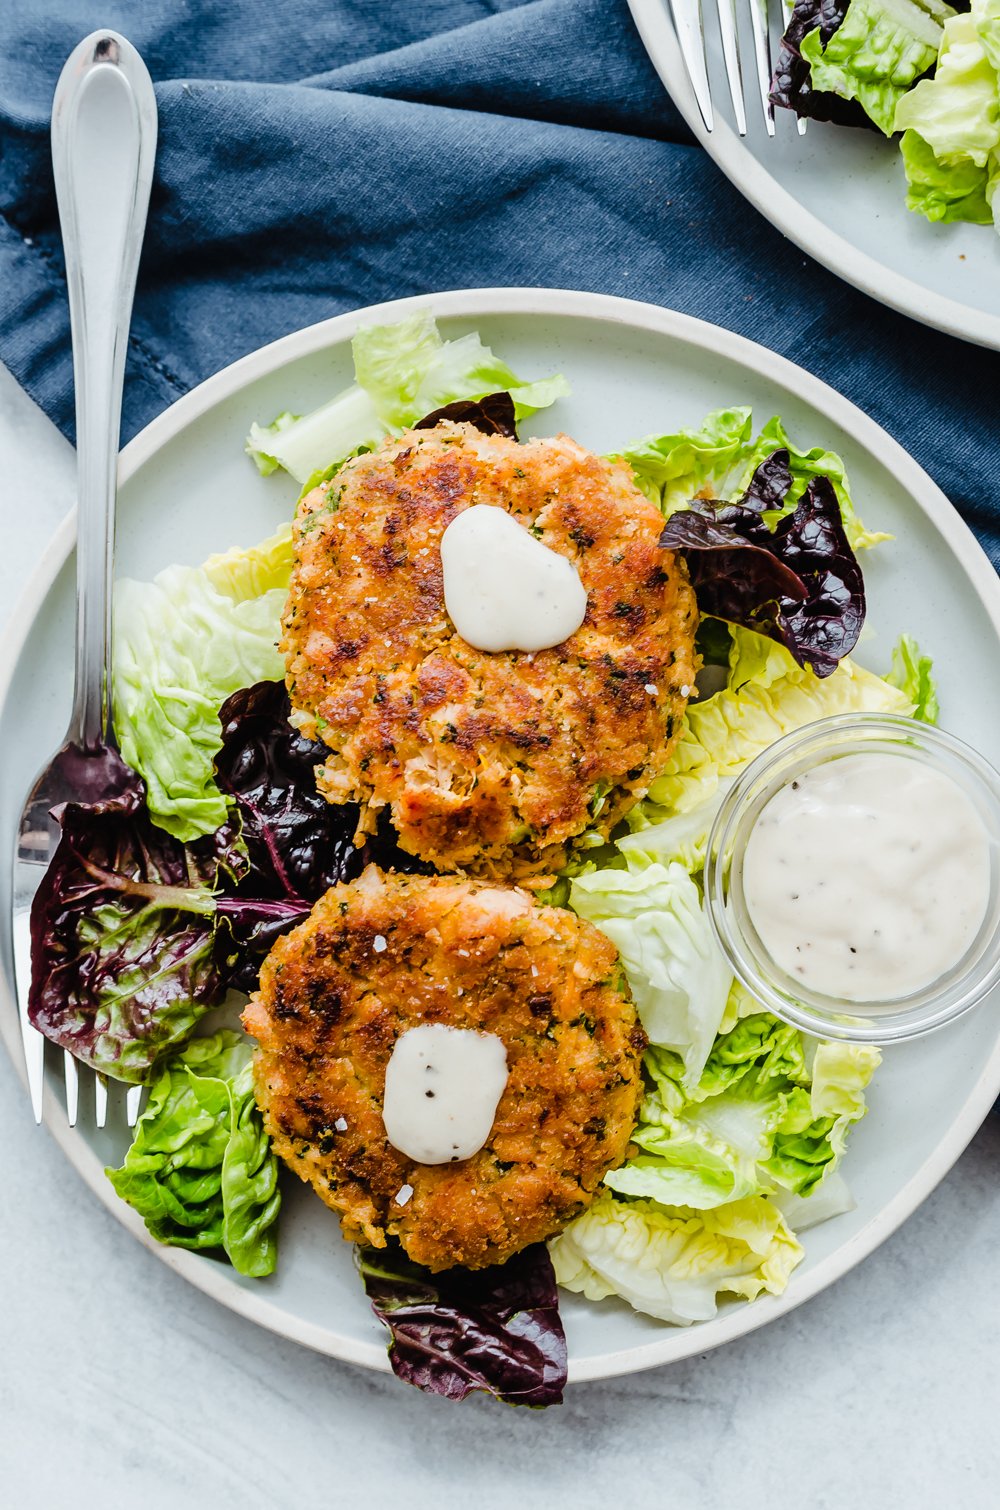 Salmon patties on a bed of lettuce with dollops of lemony avocado sauce.